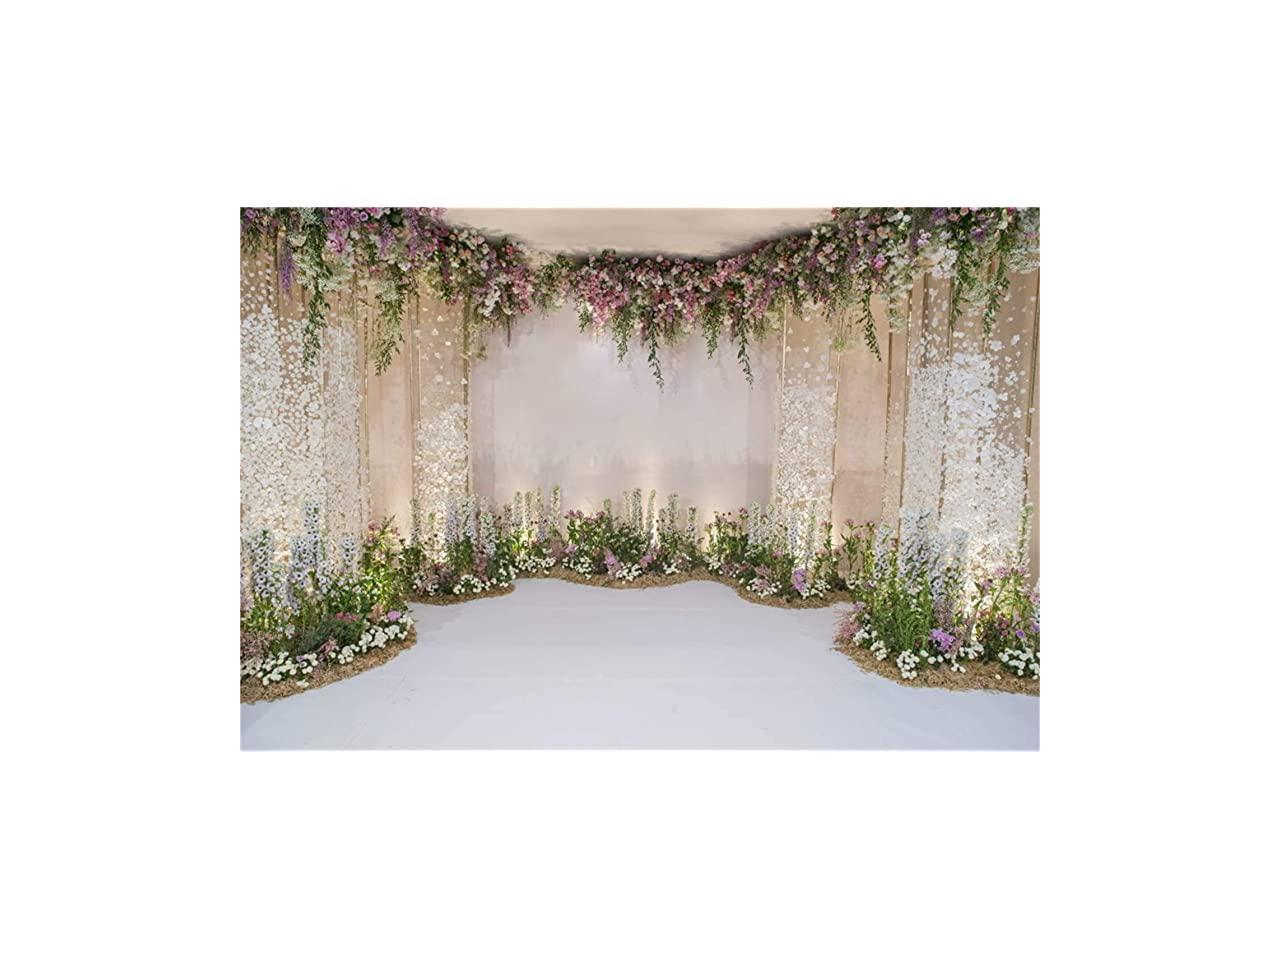 OERJU 15x10ft Photography Background for Wedding Golden White Chiffon Curtain Colorful Flowers Wall Baby Shower Party Banner Bridal Shower Decor Marriage Anniversary Photo Backdrop Newborn Photoshoot